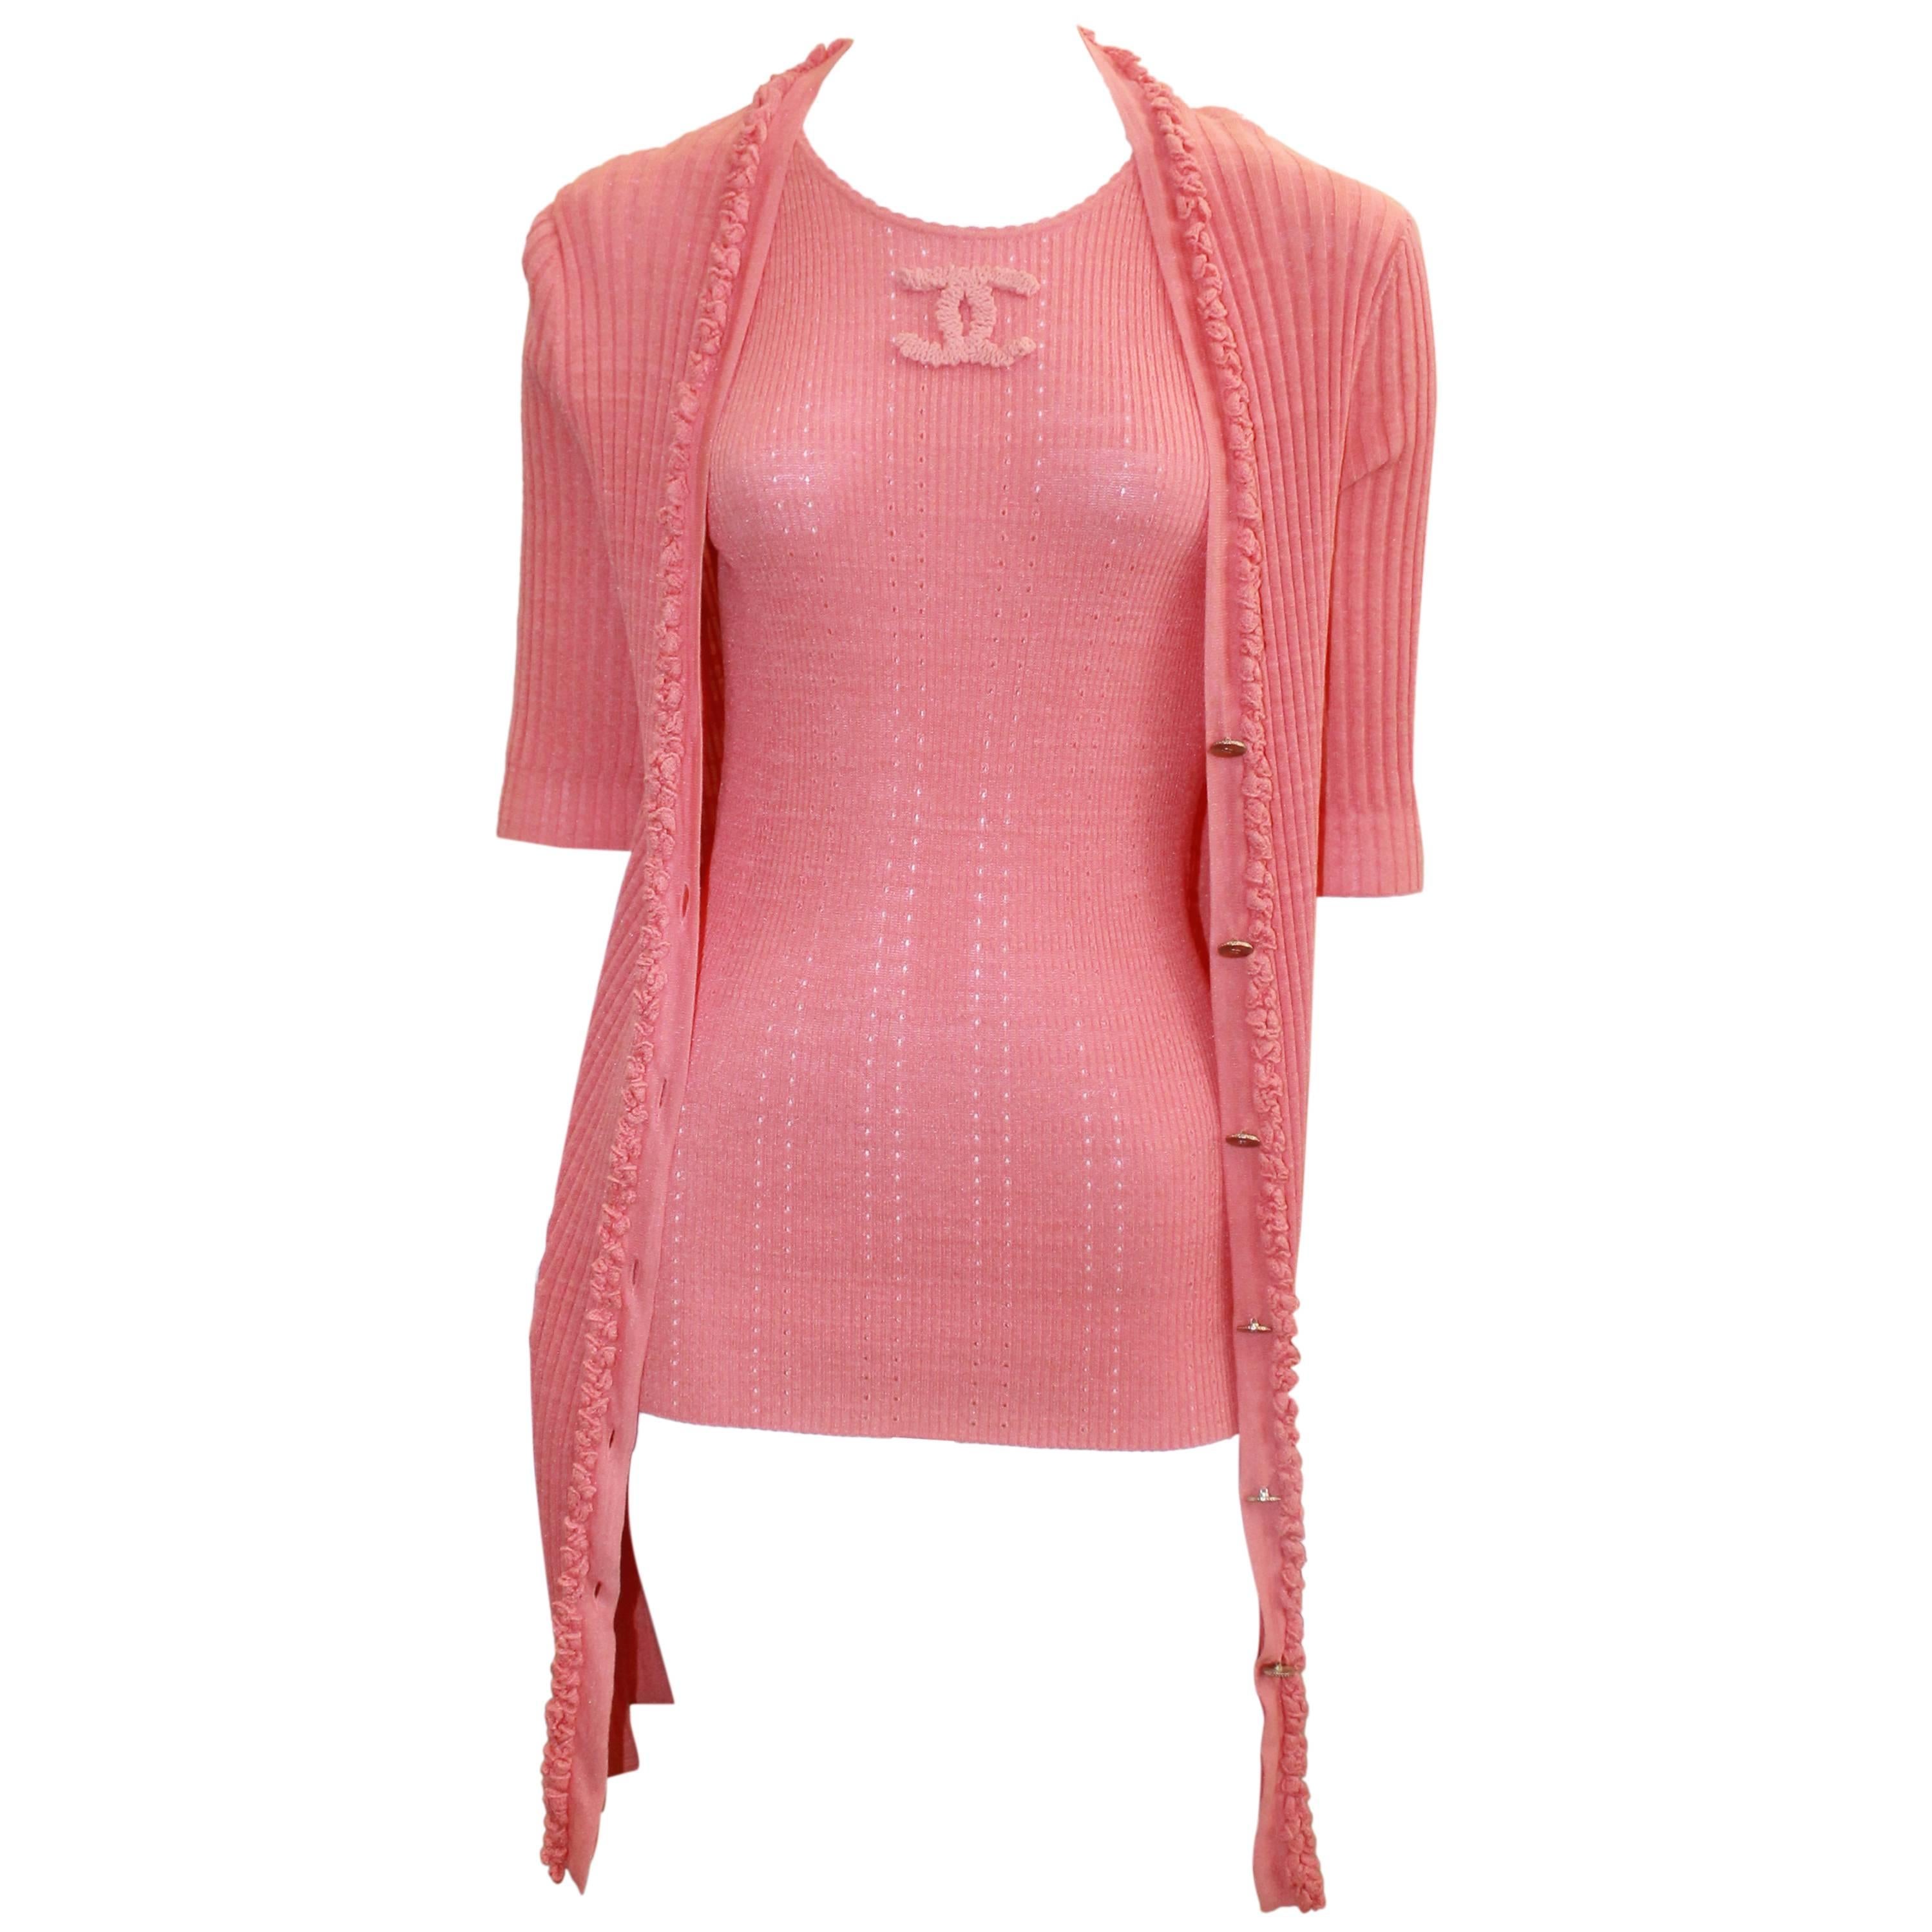 Chanel Coral Cotton Blend Knitted Sweater Set - 42 - 09P